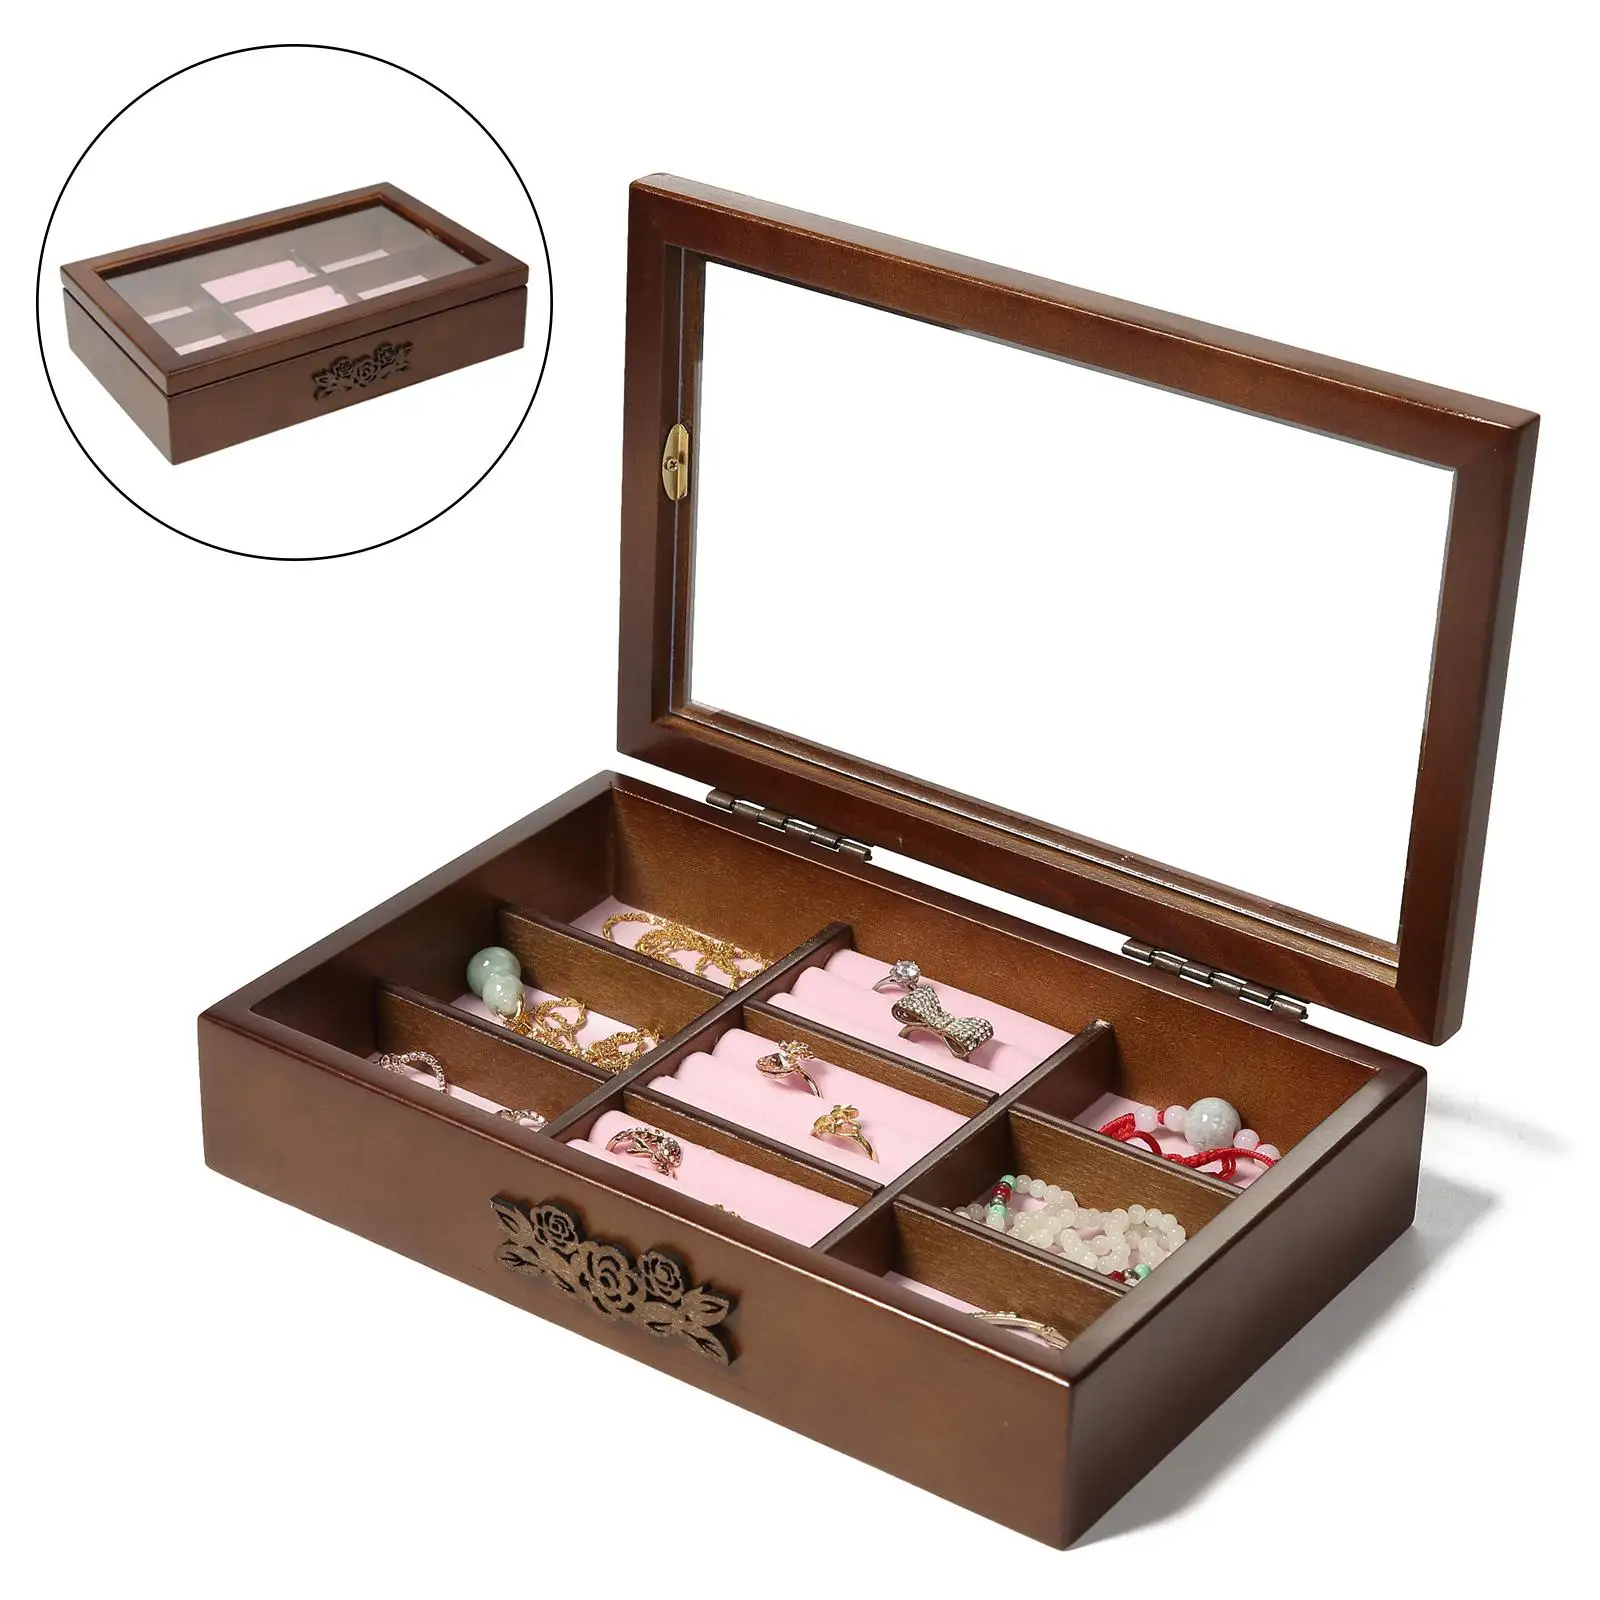 9 Slots Wooden Jewelry Storage Box Organizer for Earrings Rings Necklaces Watches